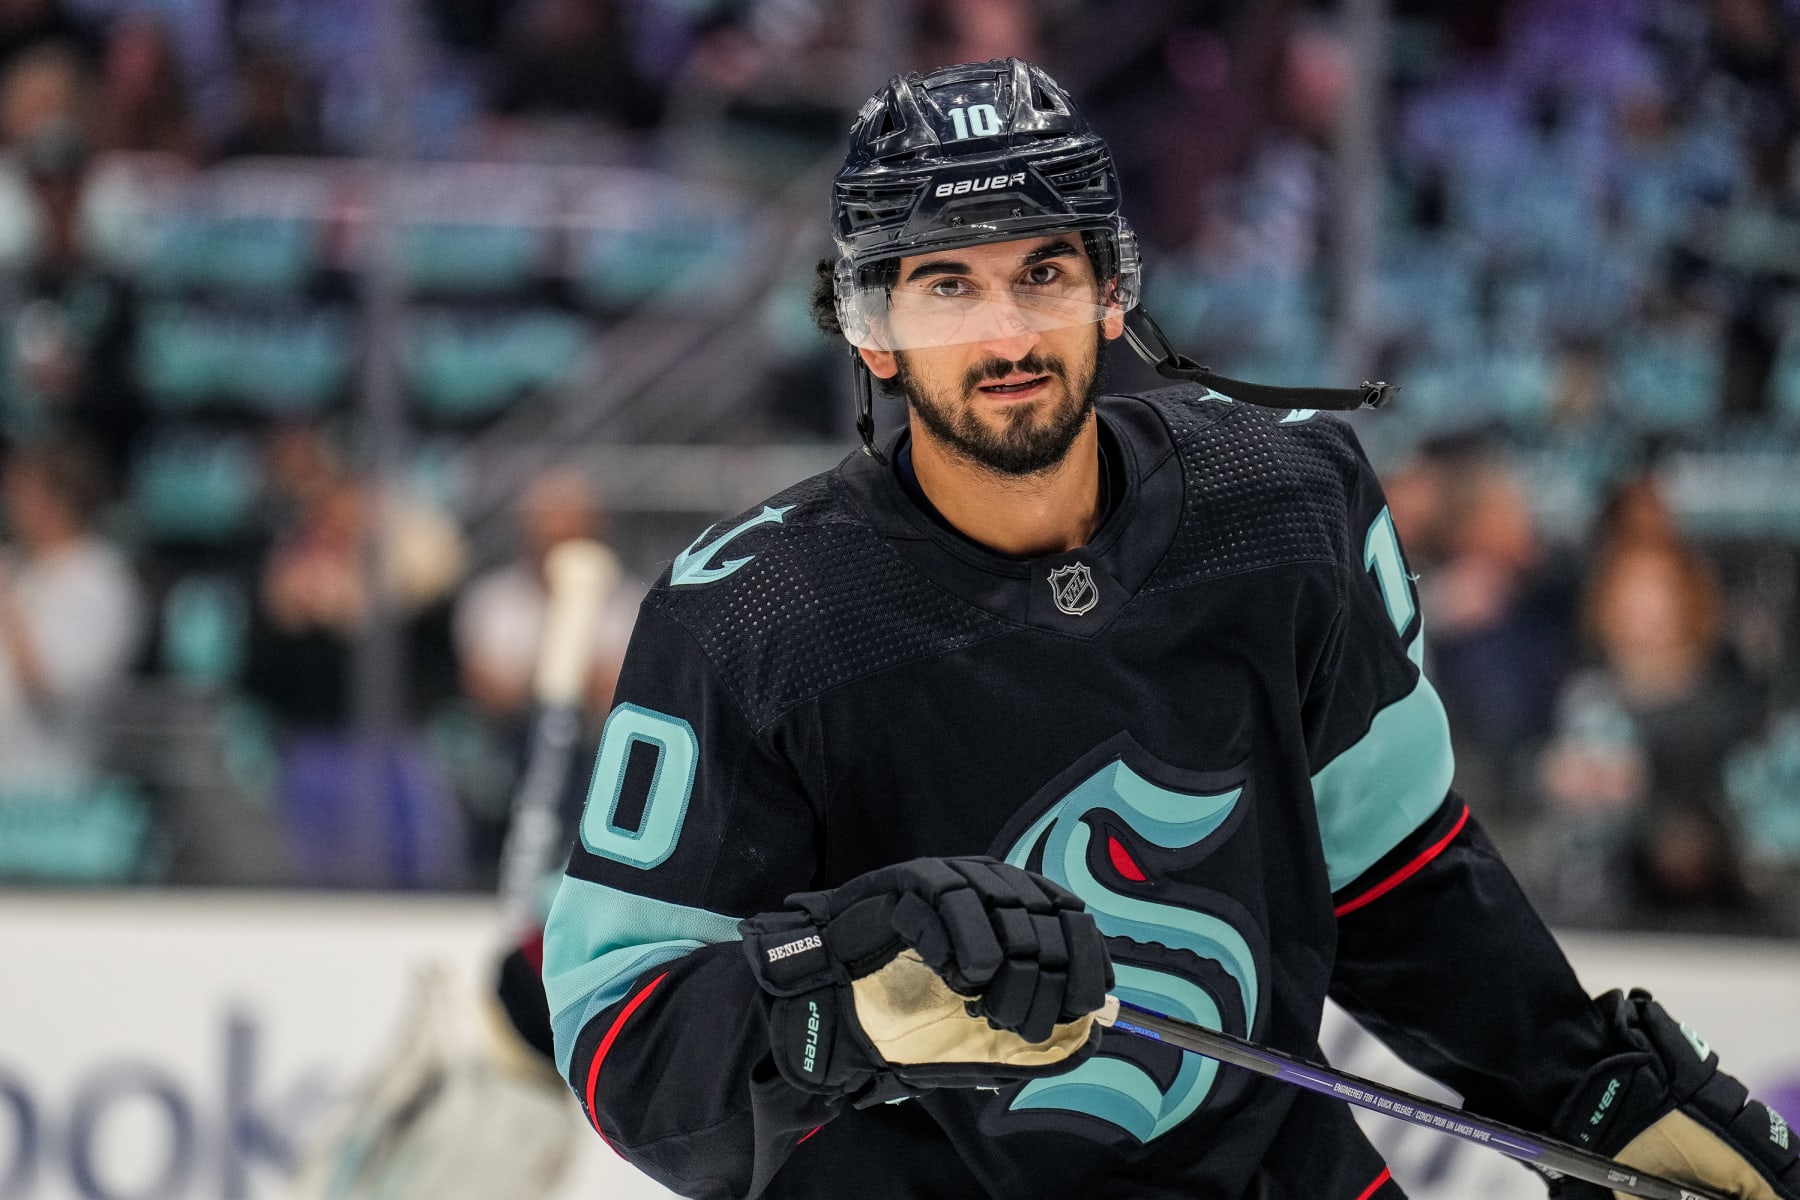 Seattle Kraken rookie Matty Beniers was named to the 2023 NHL All-Star